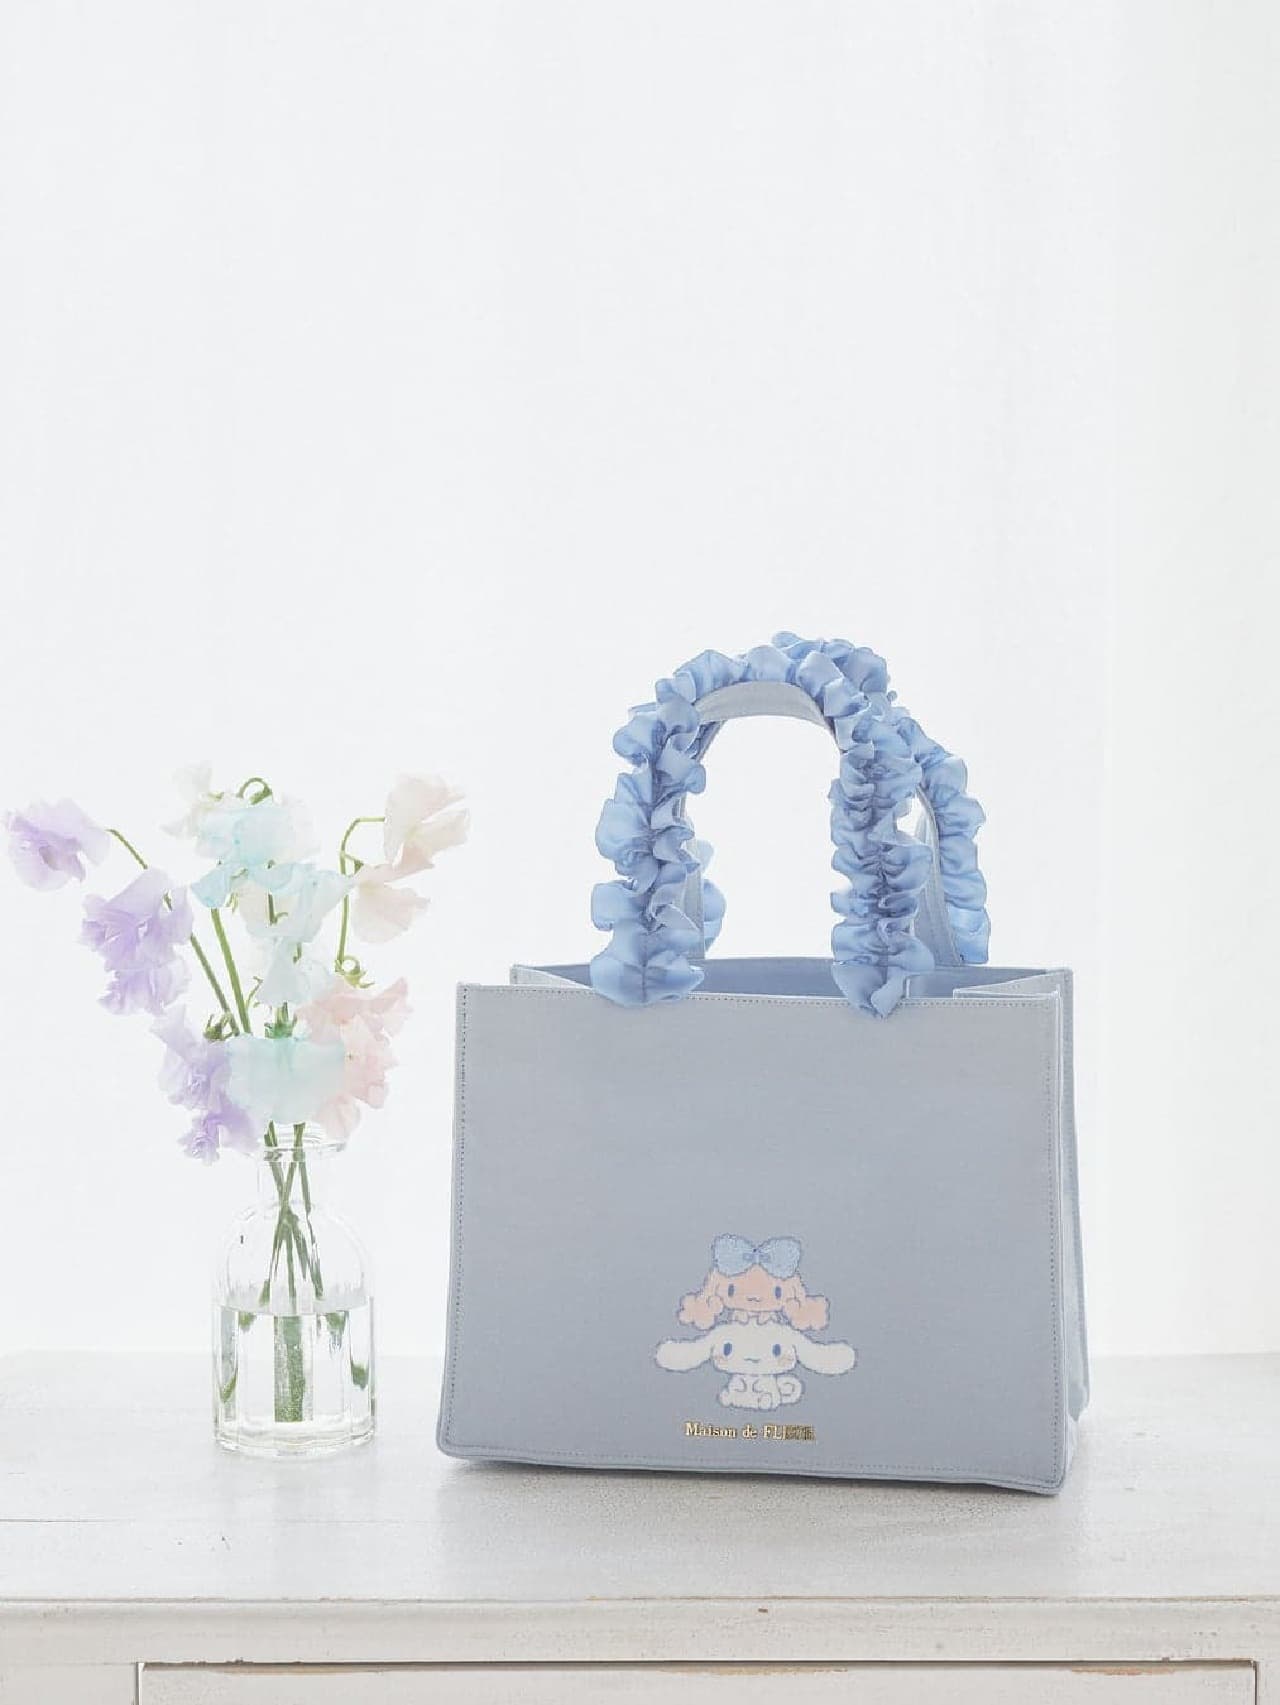 Maison de FLEUR will start accepting orders for Sanrio's Cinnamoroll special collection from March 6th. Featured items such as tote bags and pouches are now available Image 2